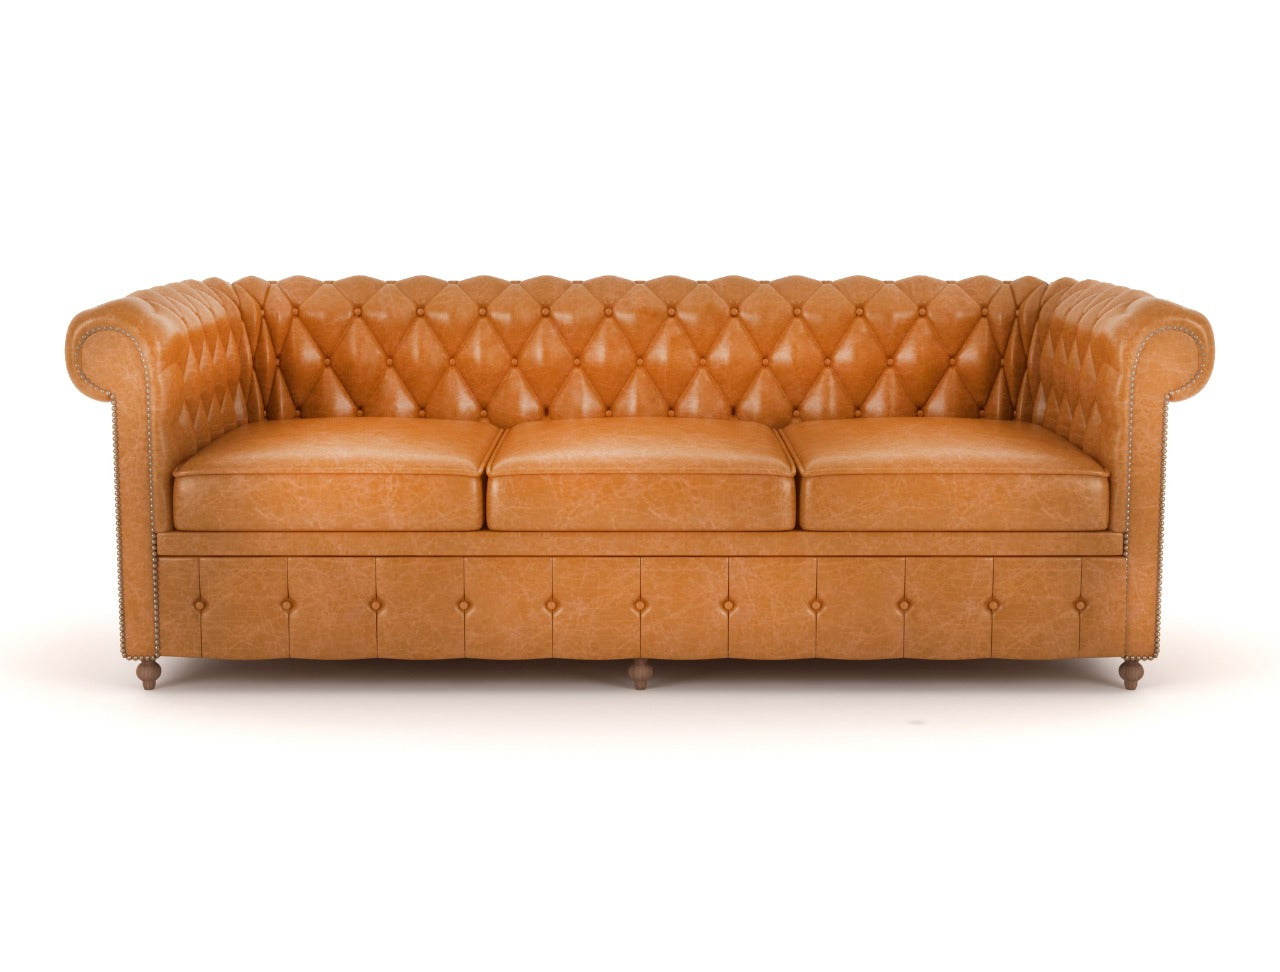 Alif 3 Seater Sofa - Light Brown Buffalo Leather - Tabeer Homes